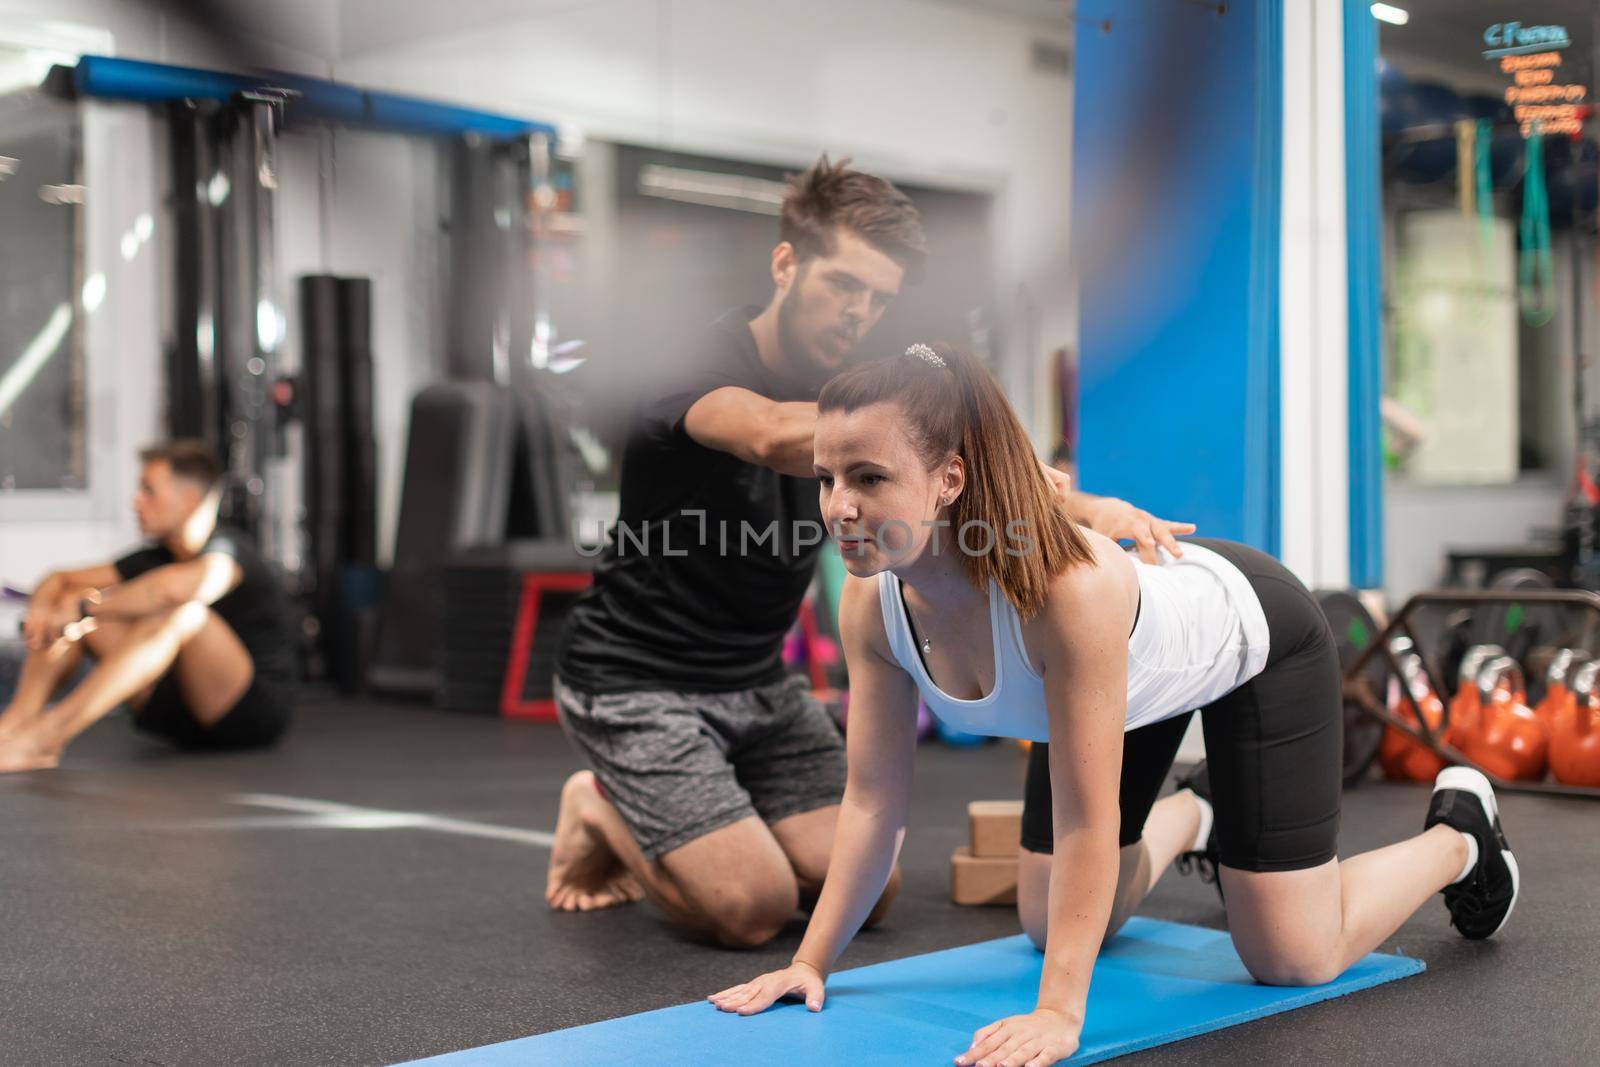 A female trainee exercises while being coached by her personal trainer at the crossfit box